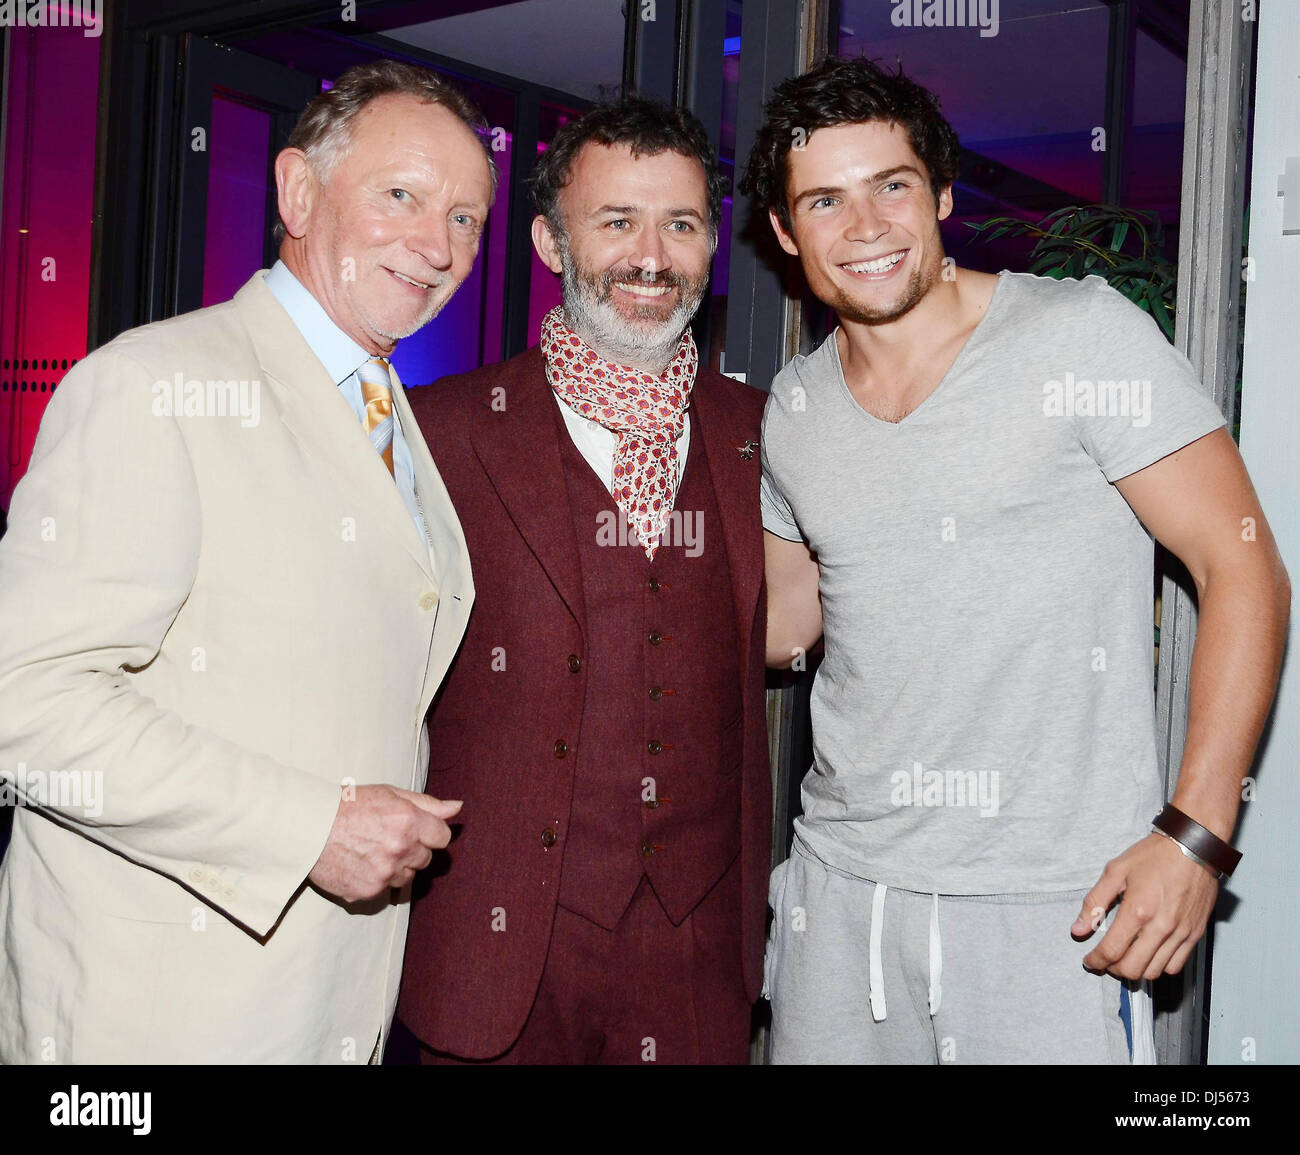 Phil Coulter & son Ryan Coulter with Tommy Tiernan The 50th Anniversary of  'The Late Late Show' at RTE Studios Dublin, Ireland - 01.06.12 Stock Photo  - Alamy